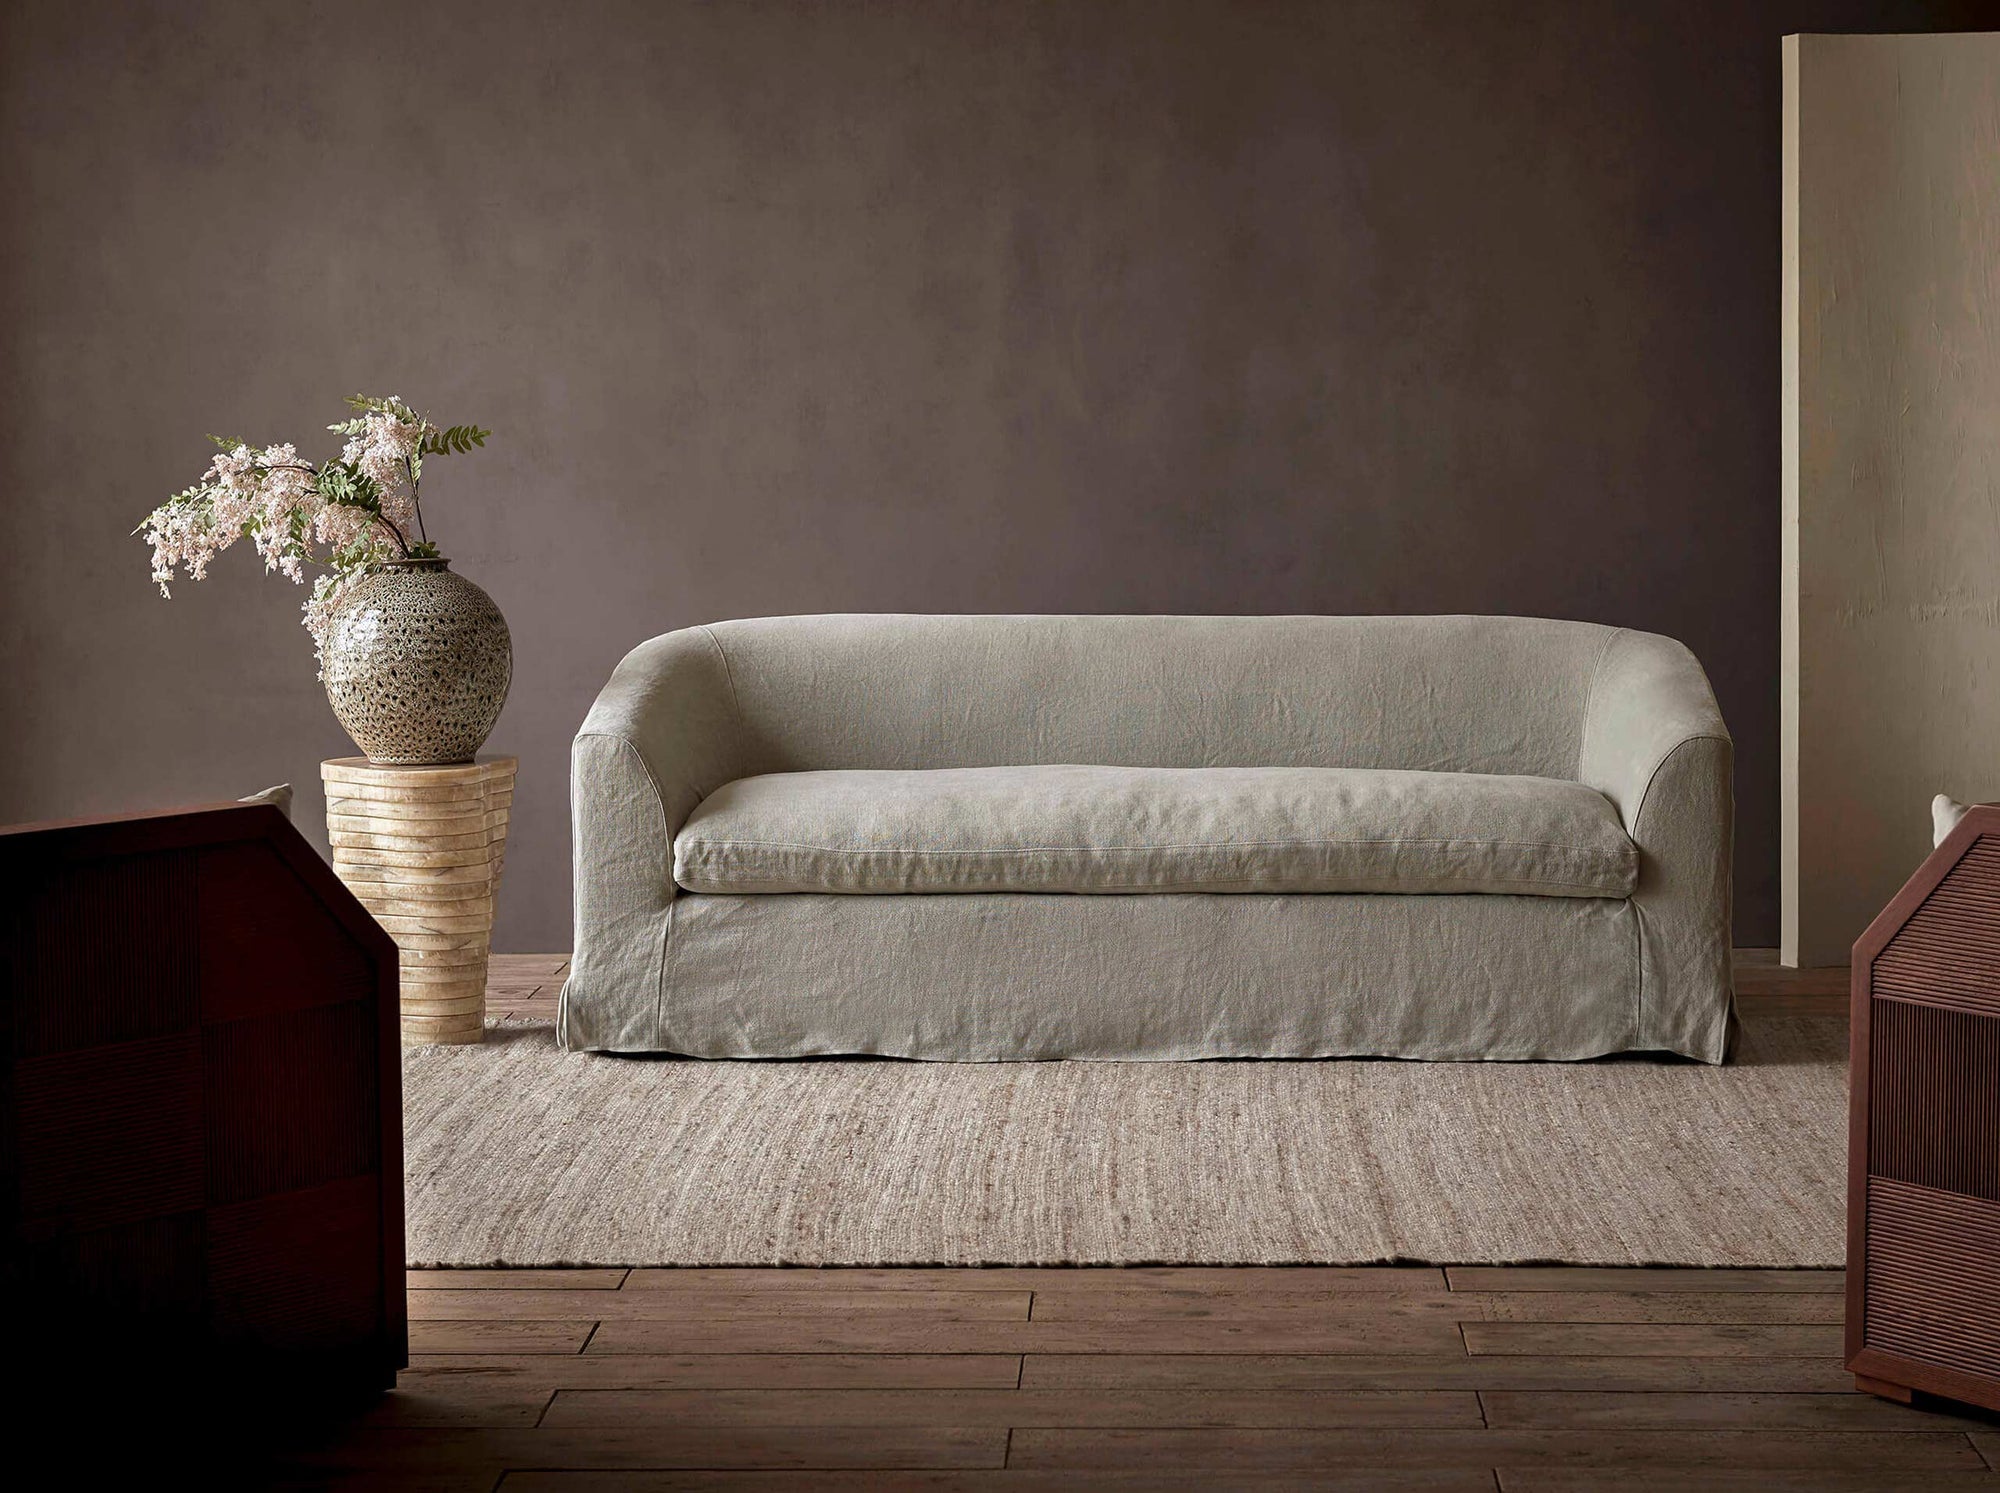 Ziki 84" Sofa in Jasmine Rice, a light warm greige Medium Weight Linen, placed in a room next to a potted plant on a side table